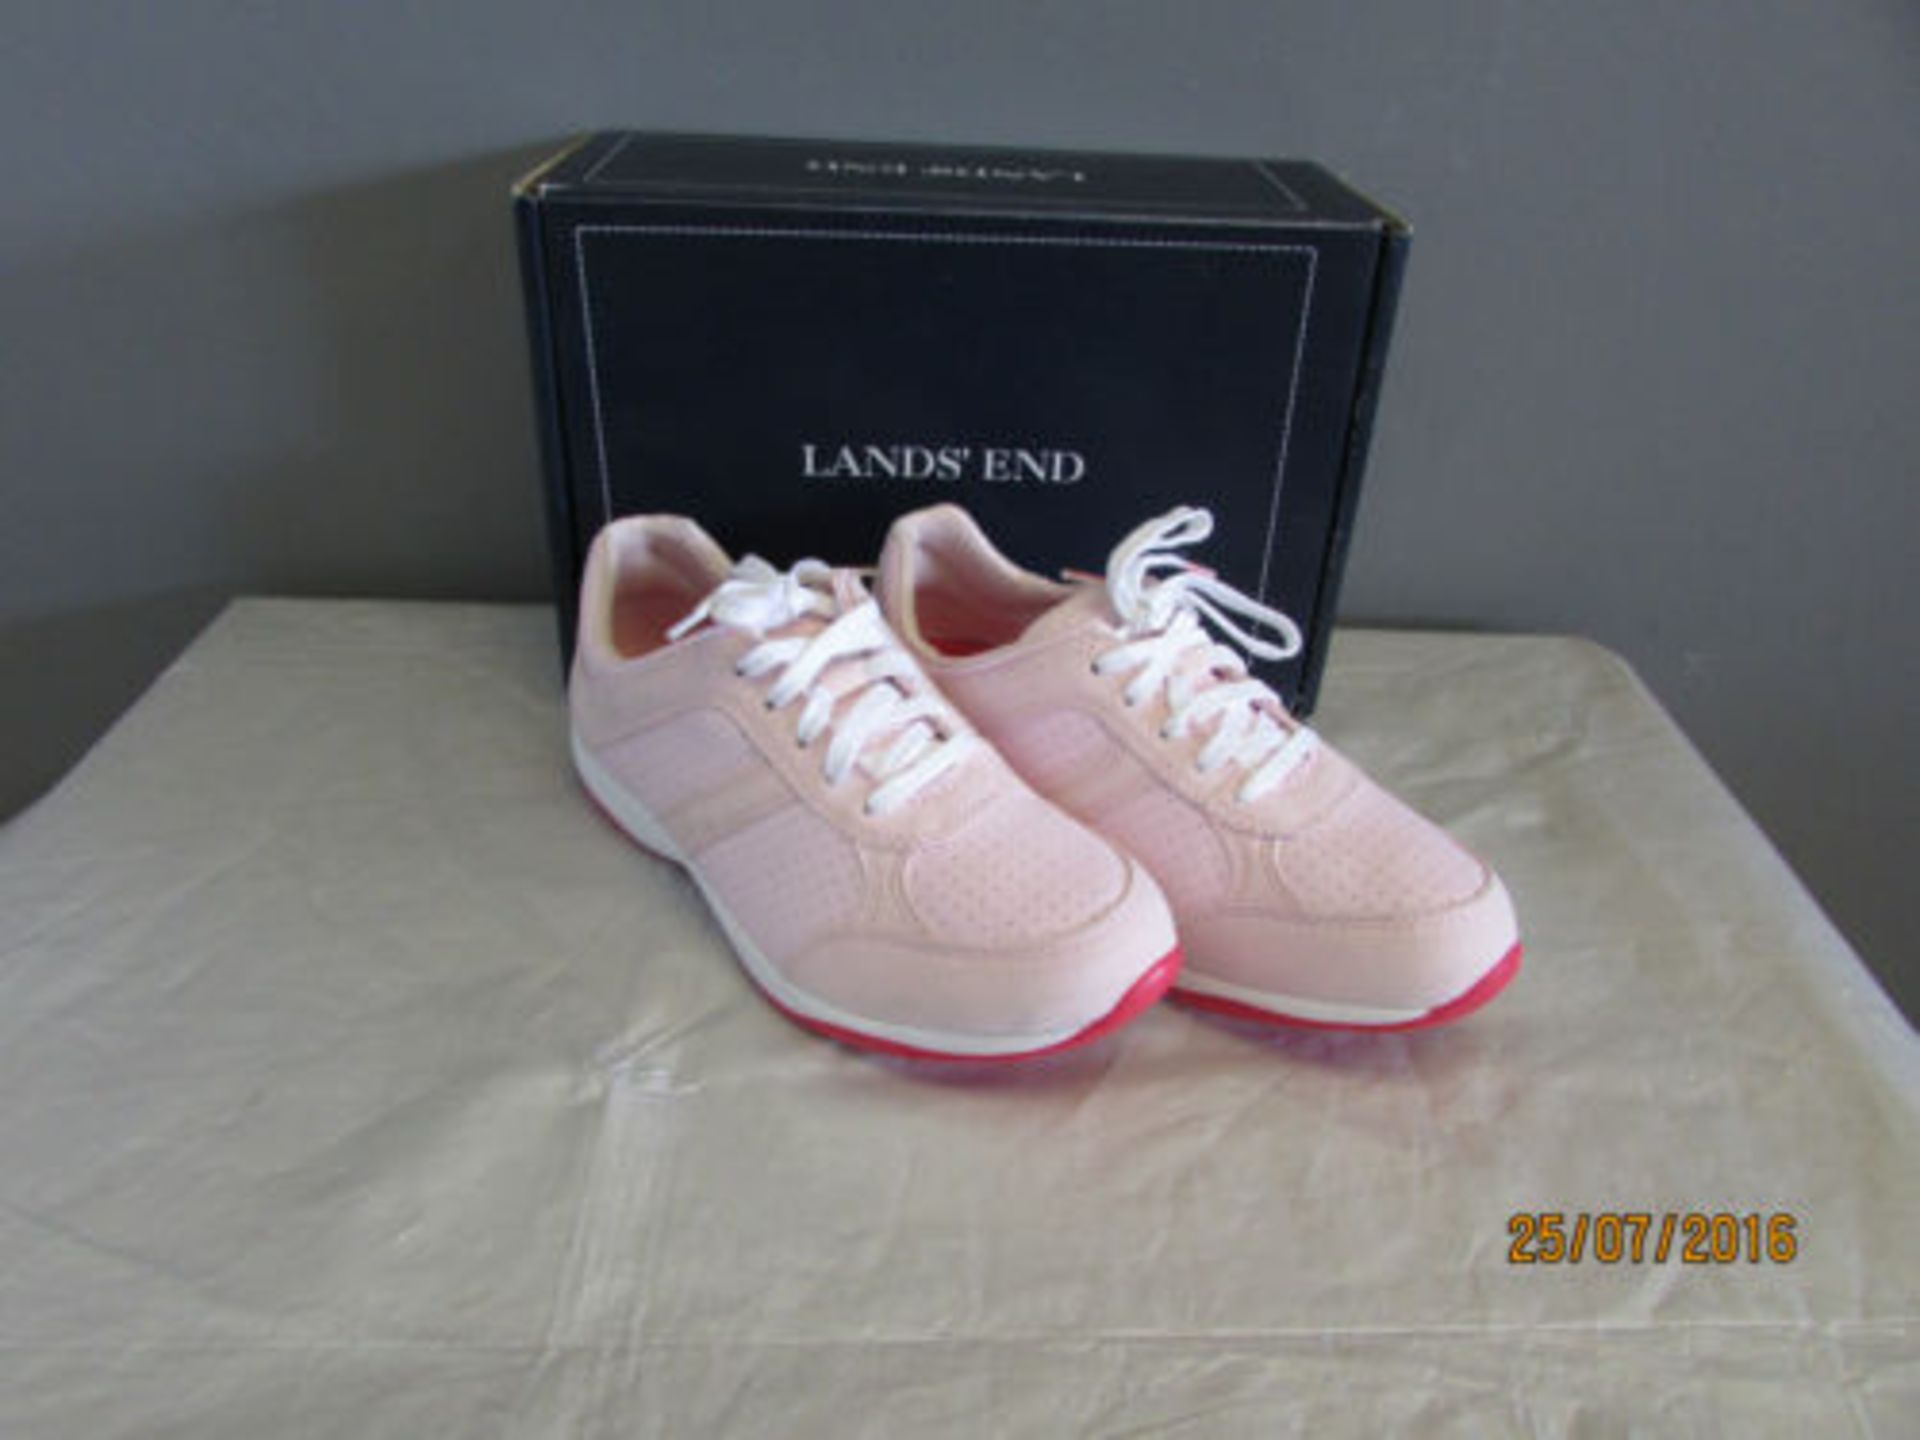 Brand New Lands End Women's Synthetic Lace Up Trainer Rosewater Pink US 6